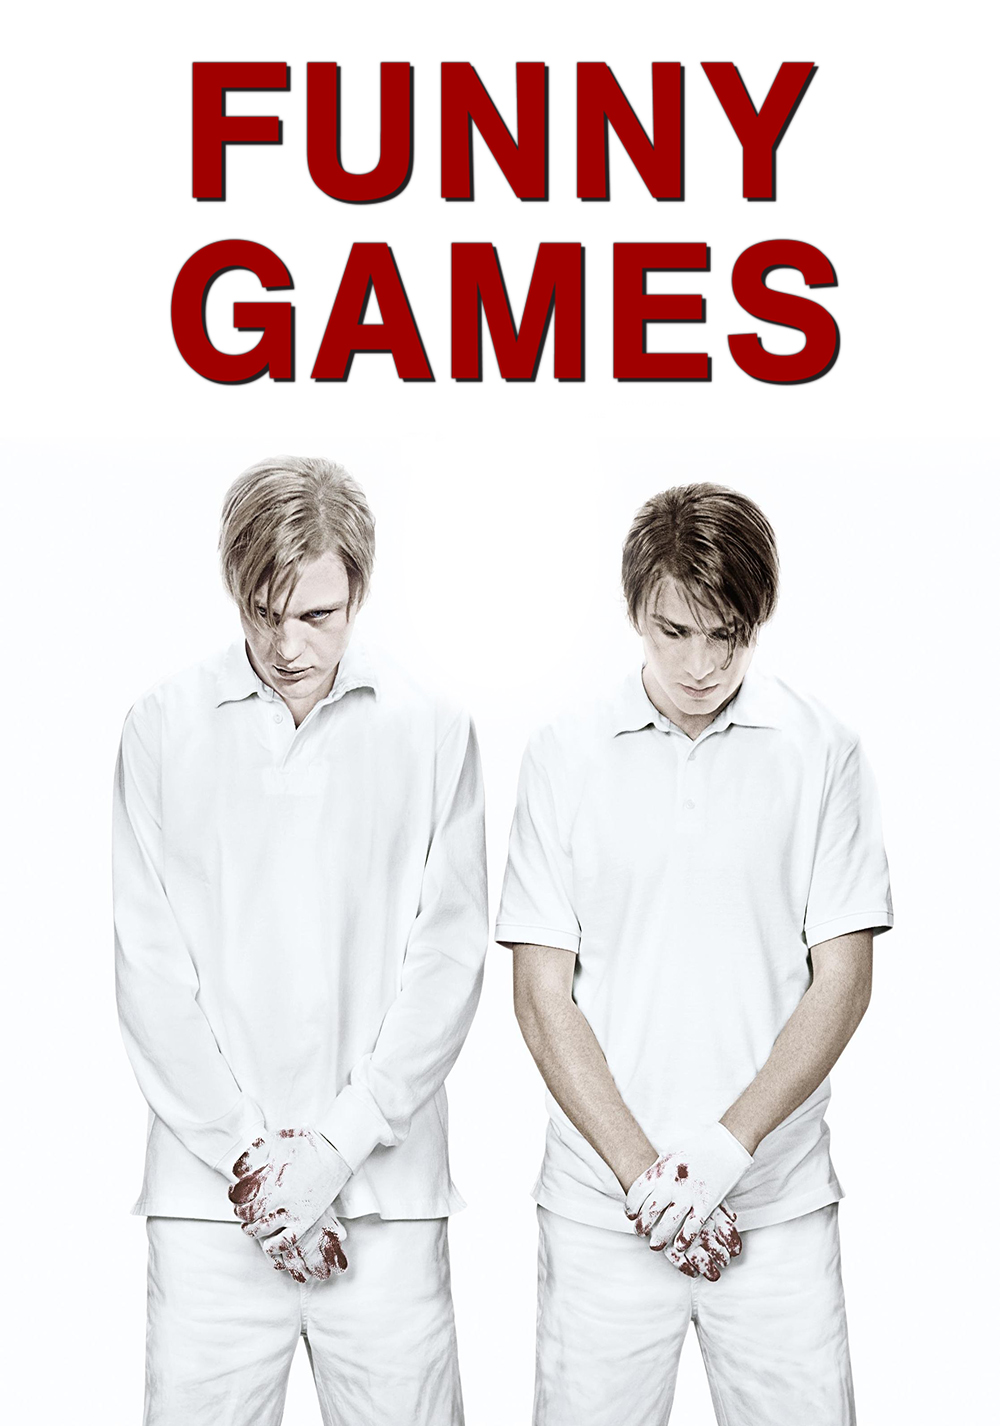 Funny games shout box